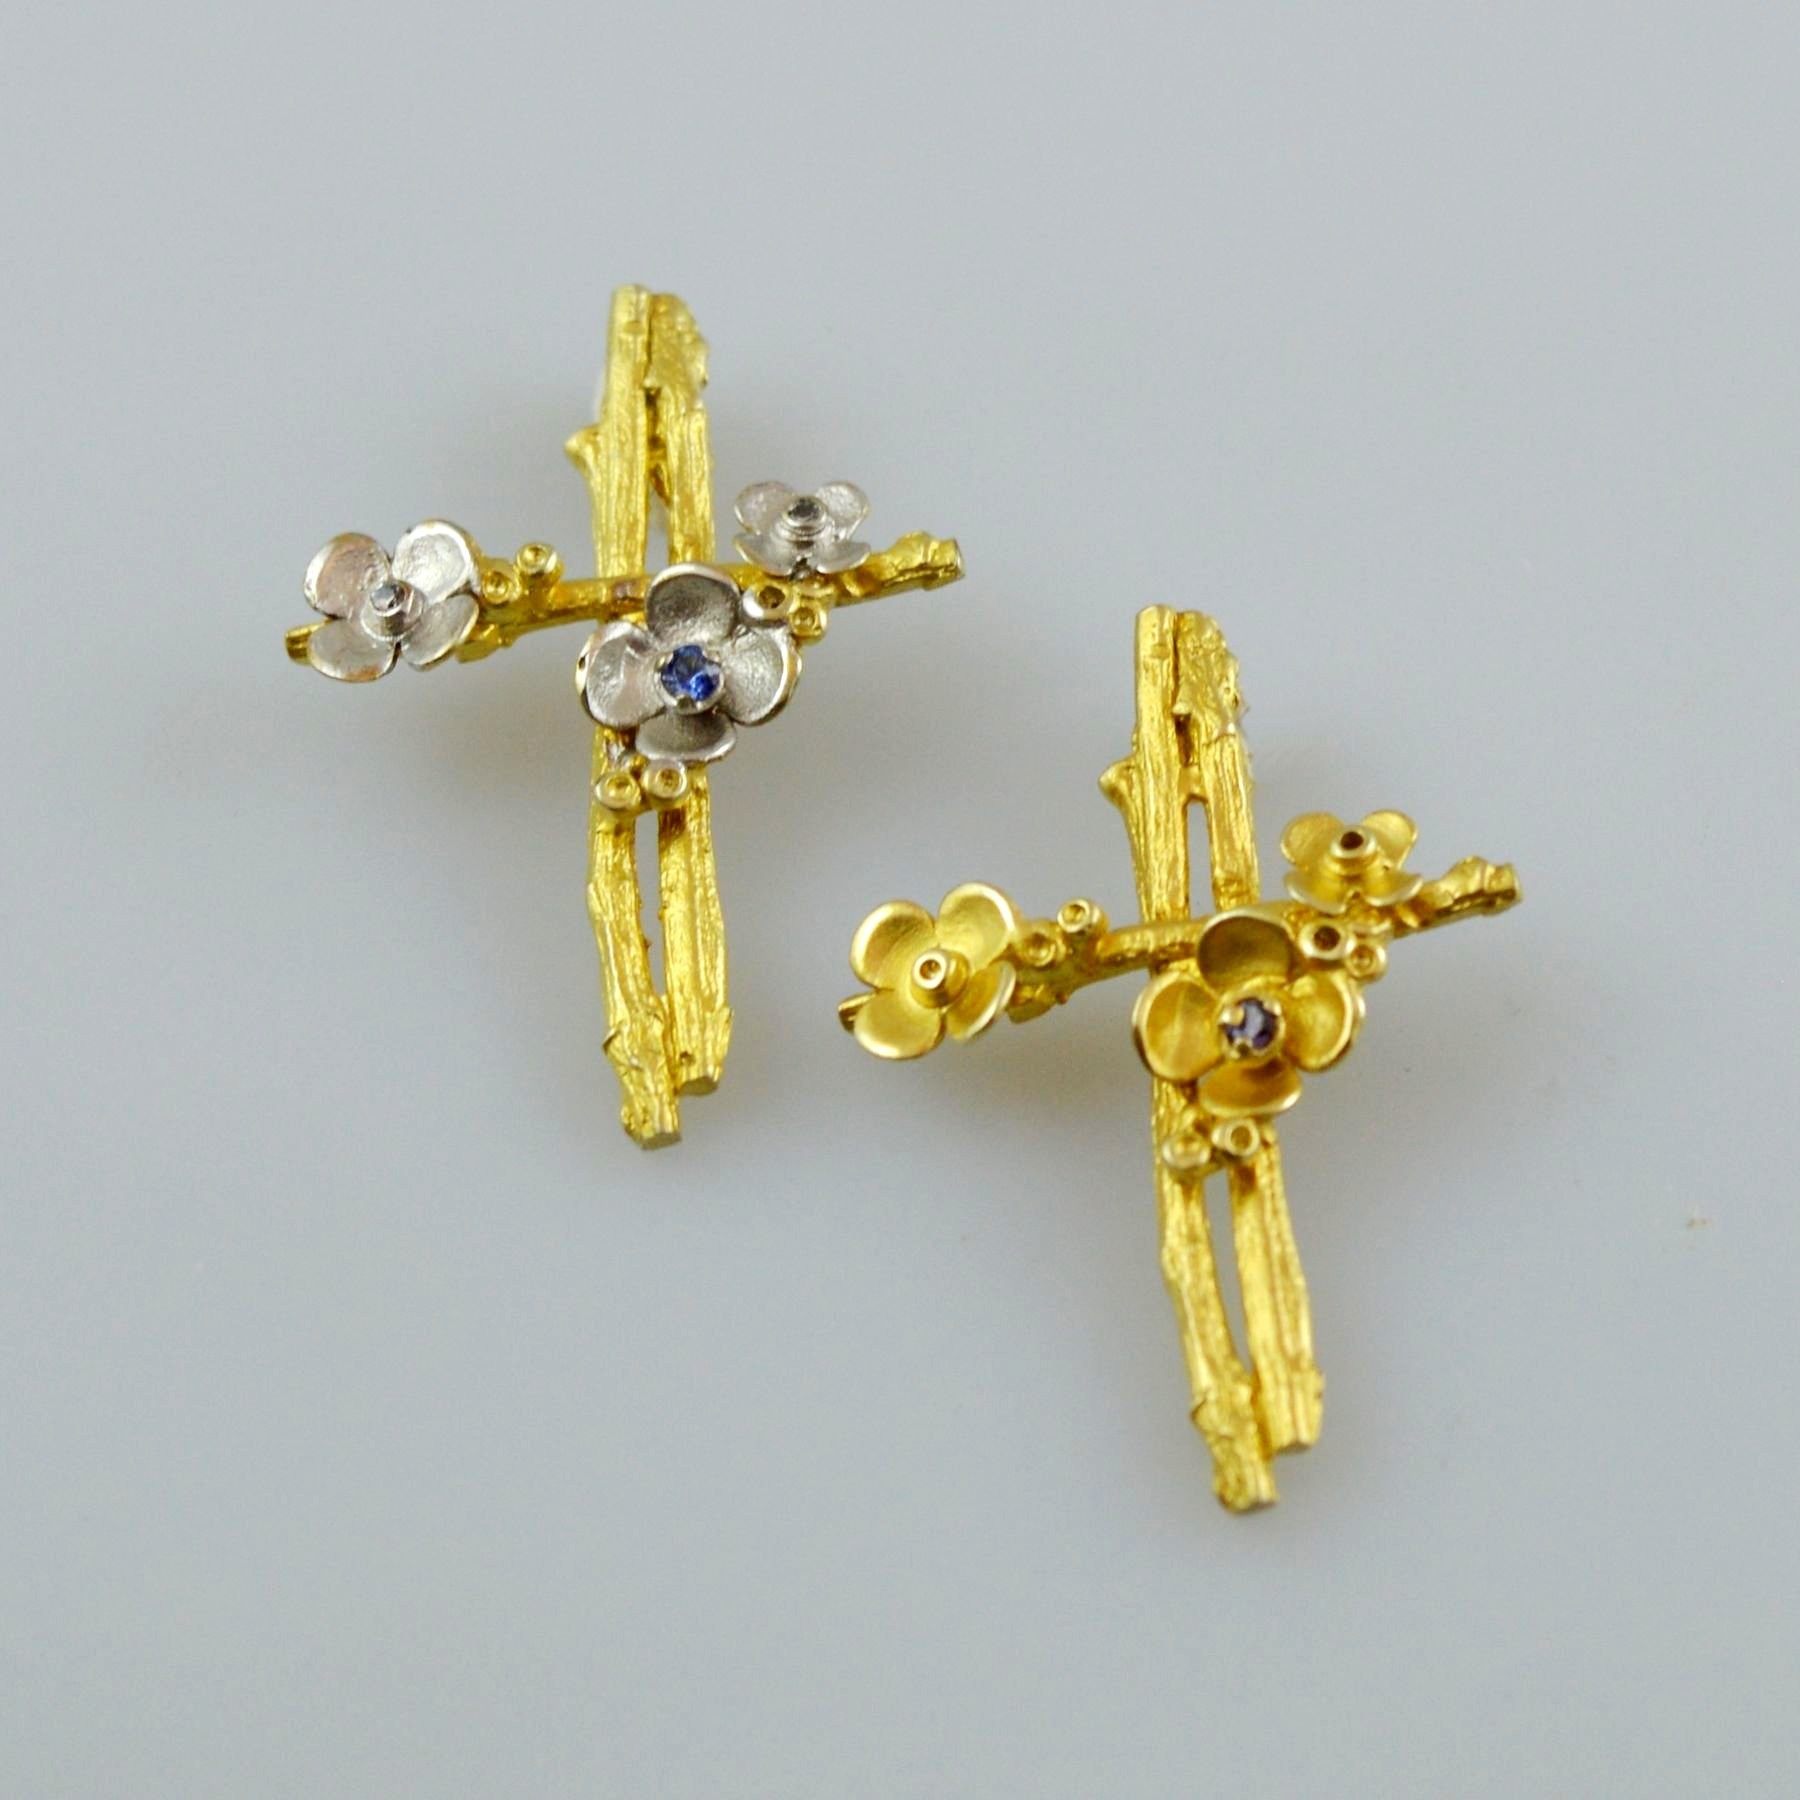 Gold or white gold cross 14K or 18K with synthetic stones or semiprecious stones with diamonds brilliant cut